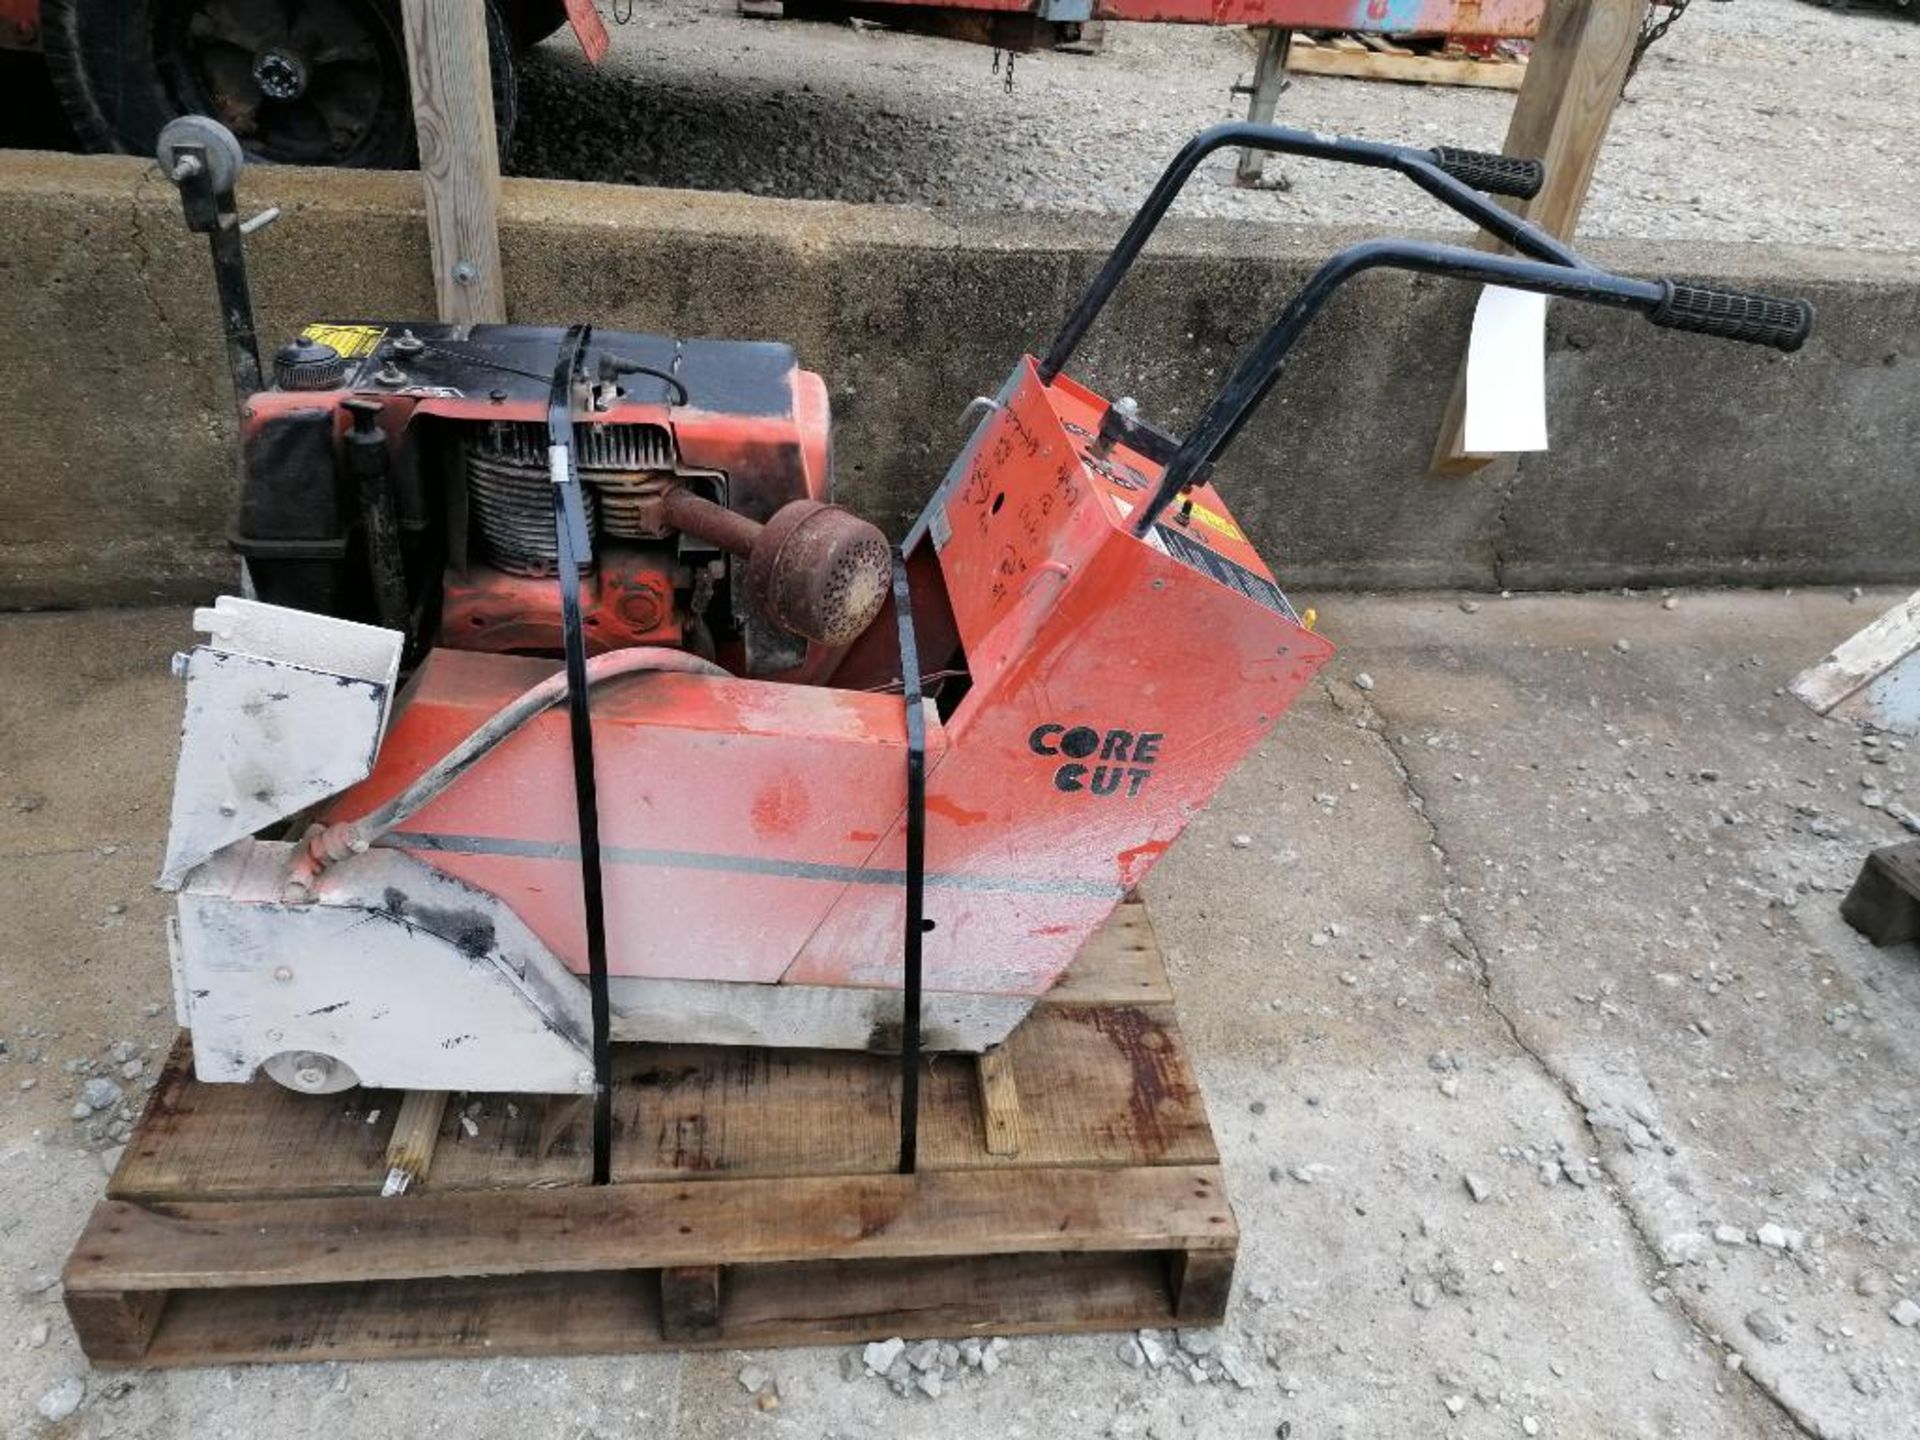 (1) CORE CUT CC1414K Walk Behind Concrete Saw, Serial #1255237 with Kohler Magnum 14 Engine. Located